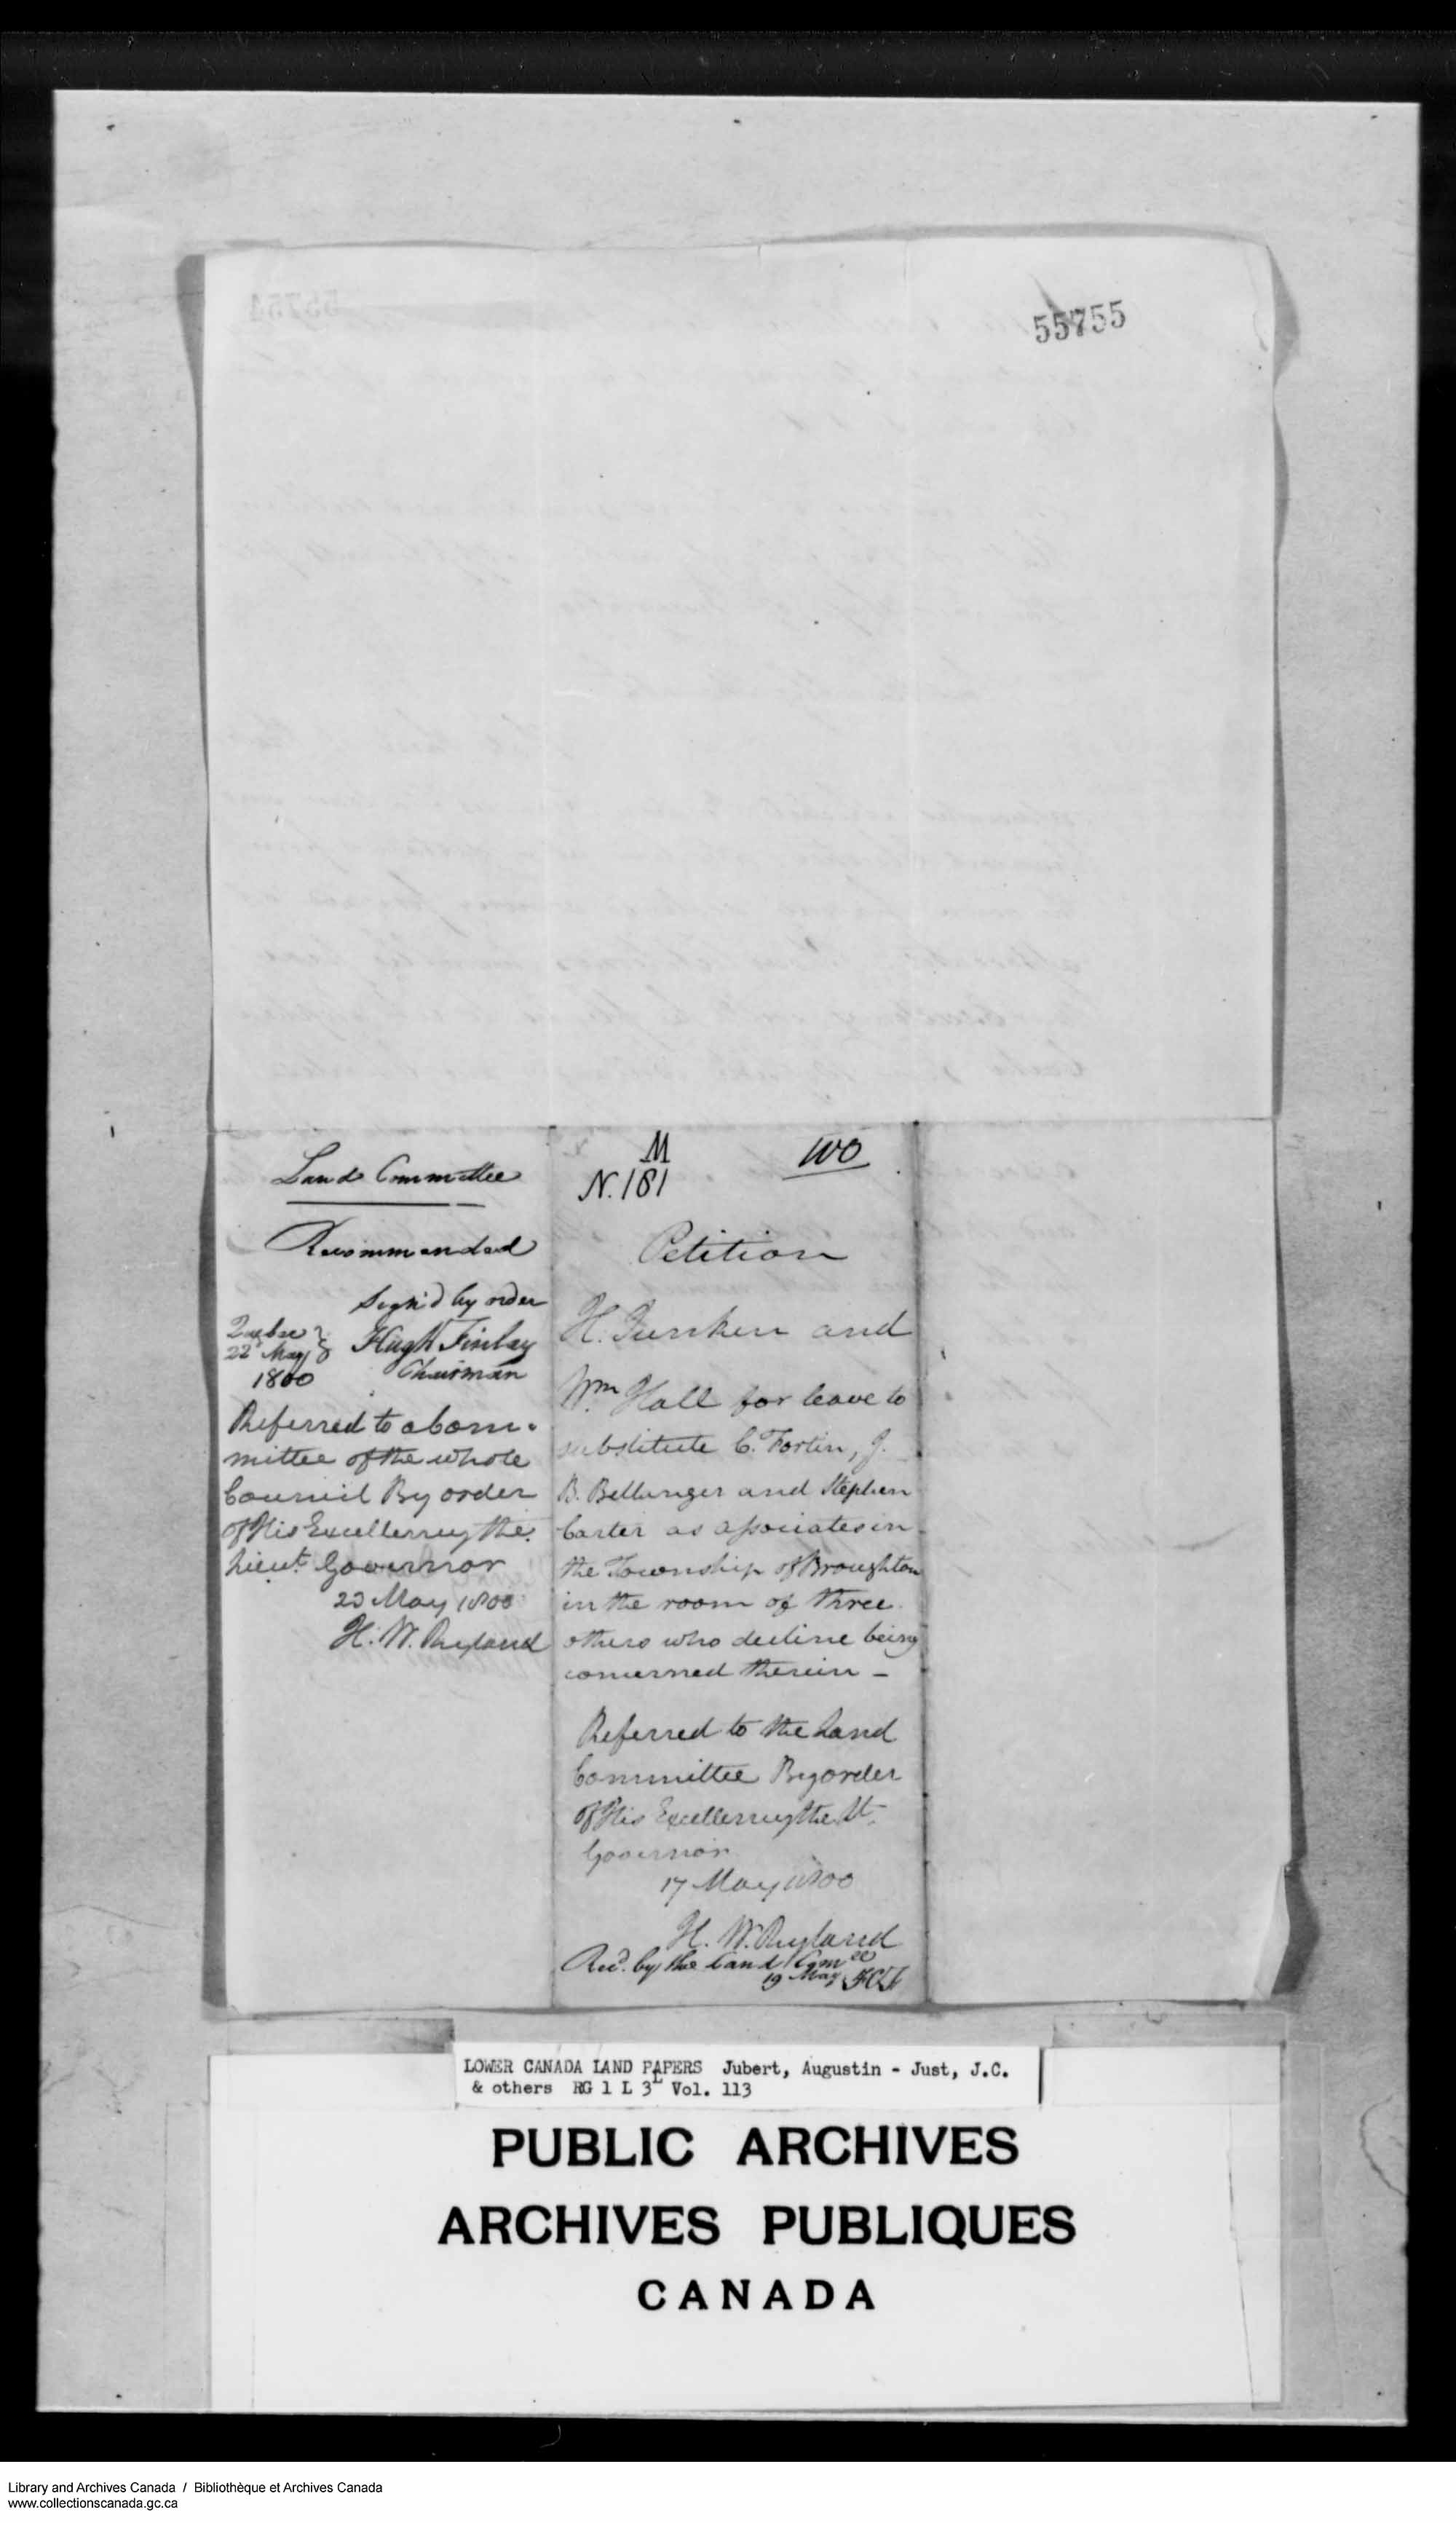 Digitized page of  for Image No.: e008700243